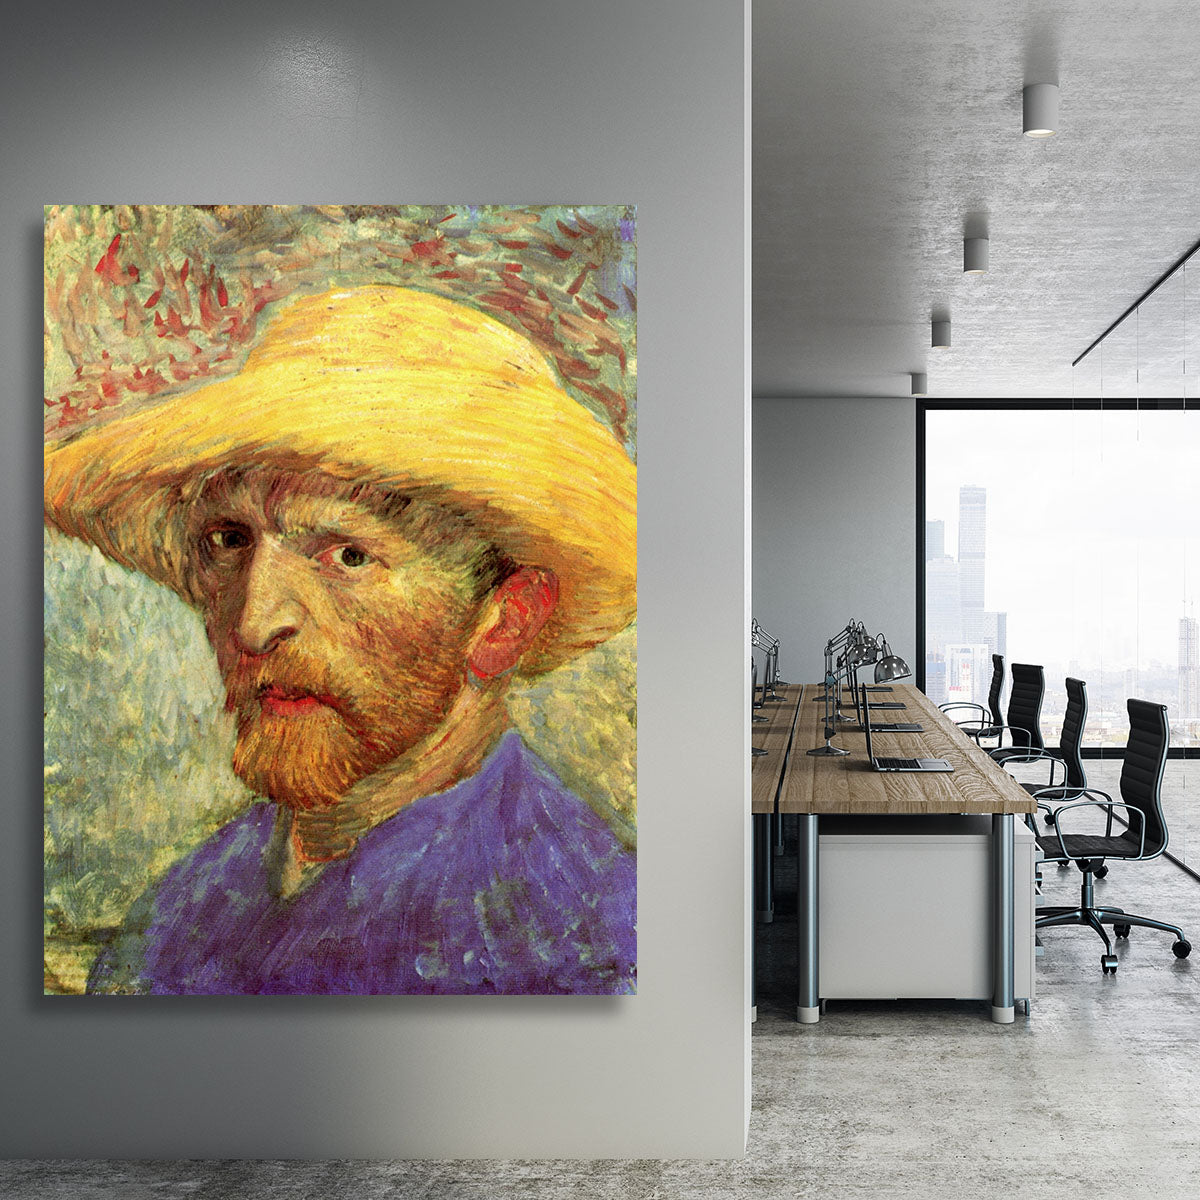 Self-Portrait with Straw Hat 3 by Van Gogh Canvas Print or Poster - Canvas Art Rocks - 3